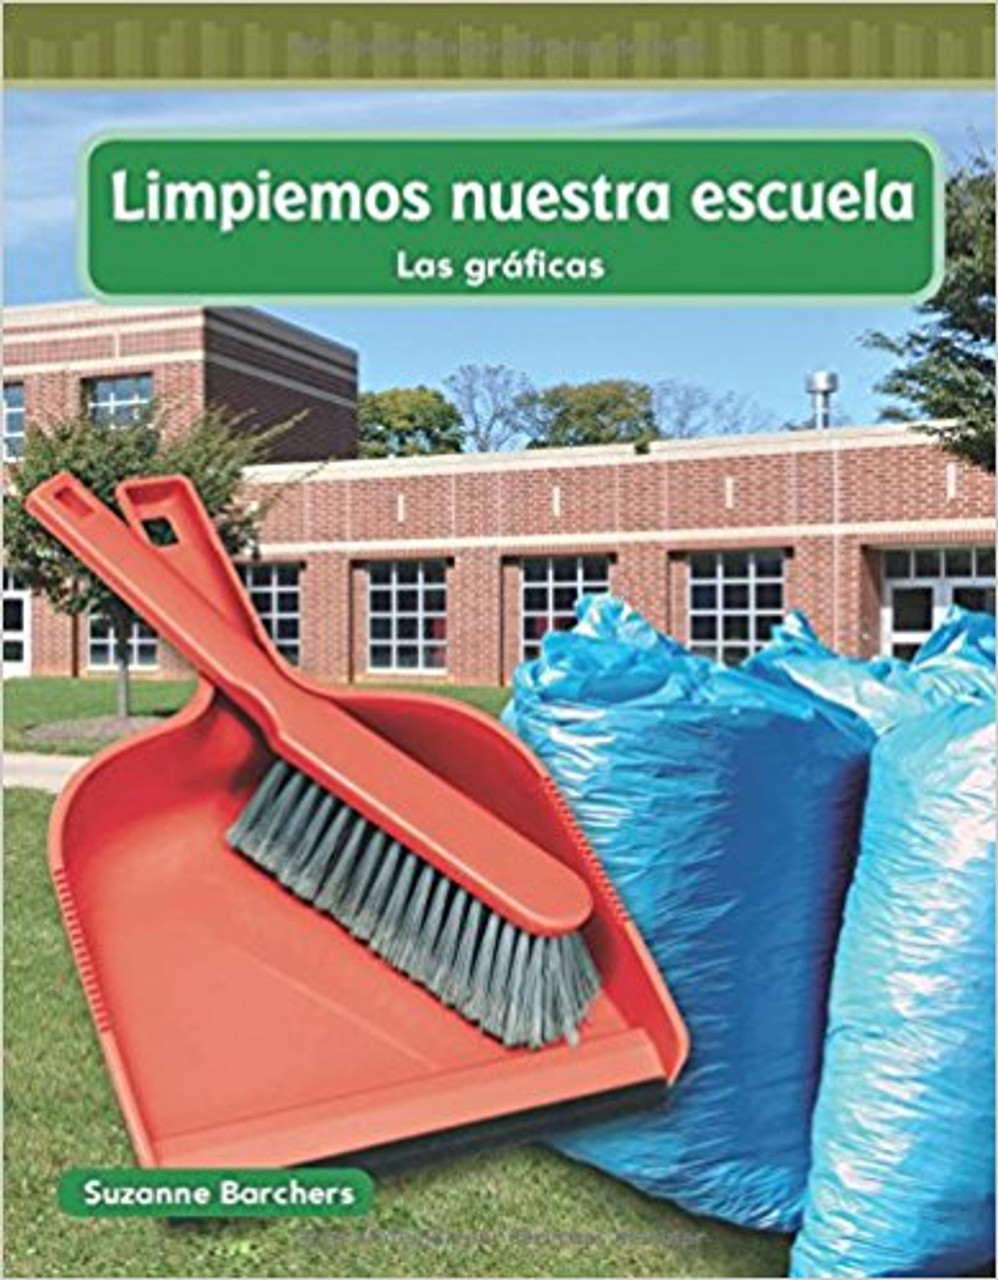 Limpiemos nuestra escuela (Cleaning Our School) by Suzanne Barchers